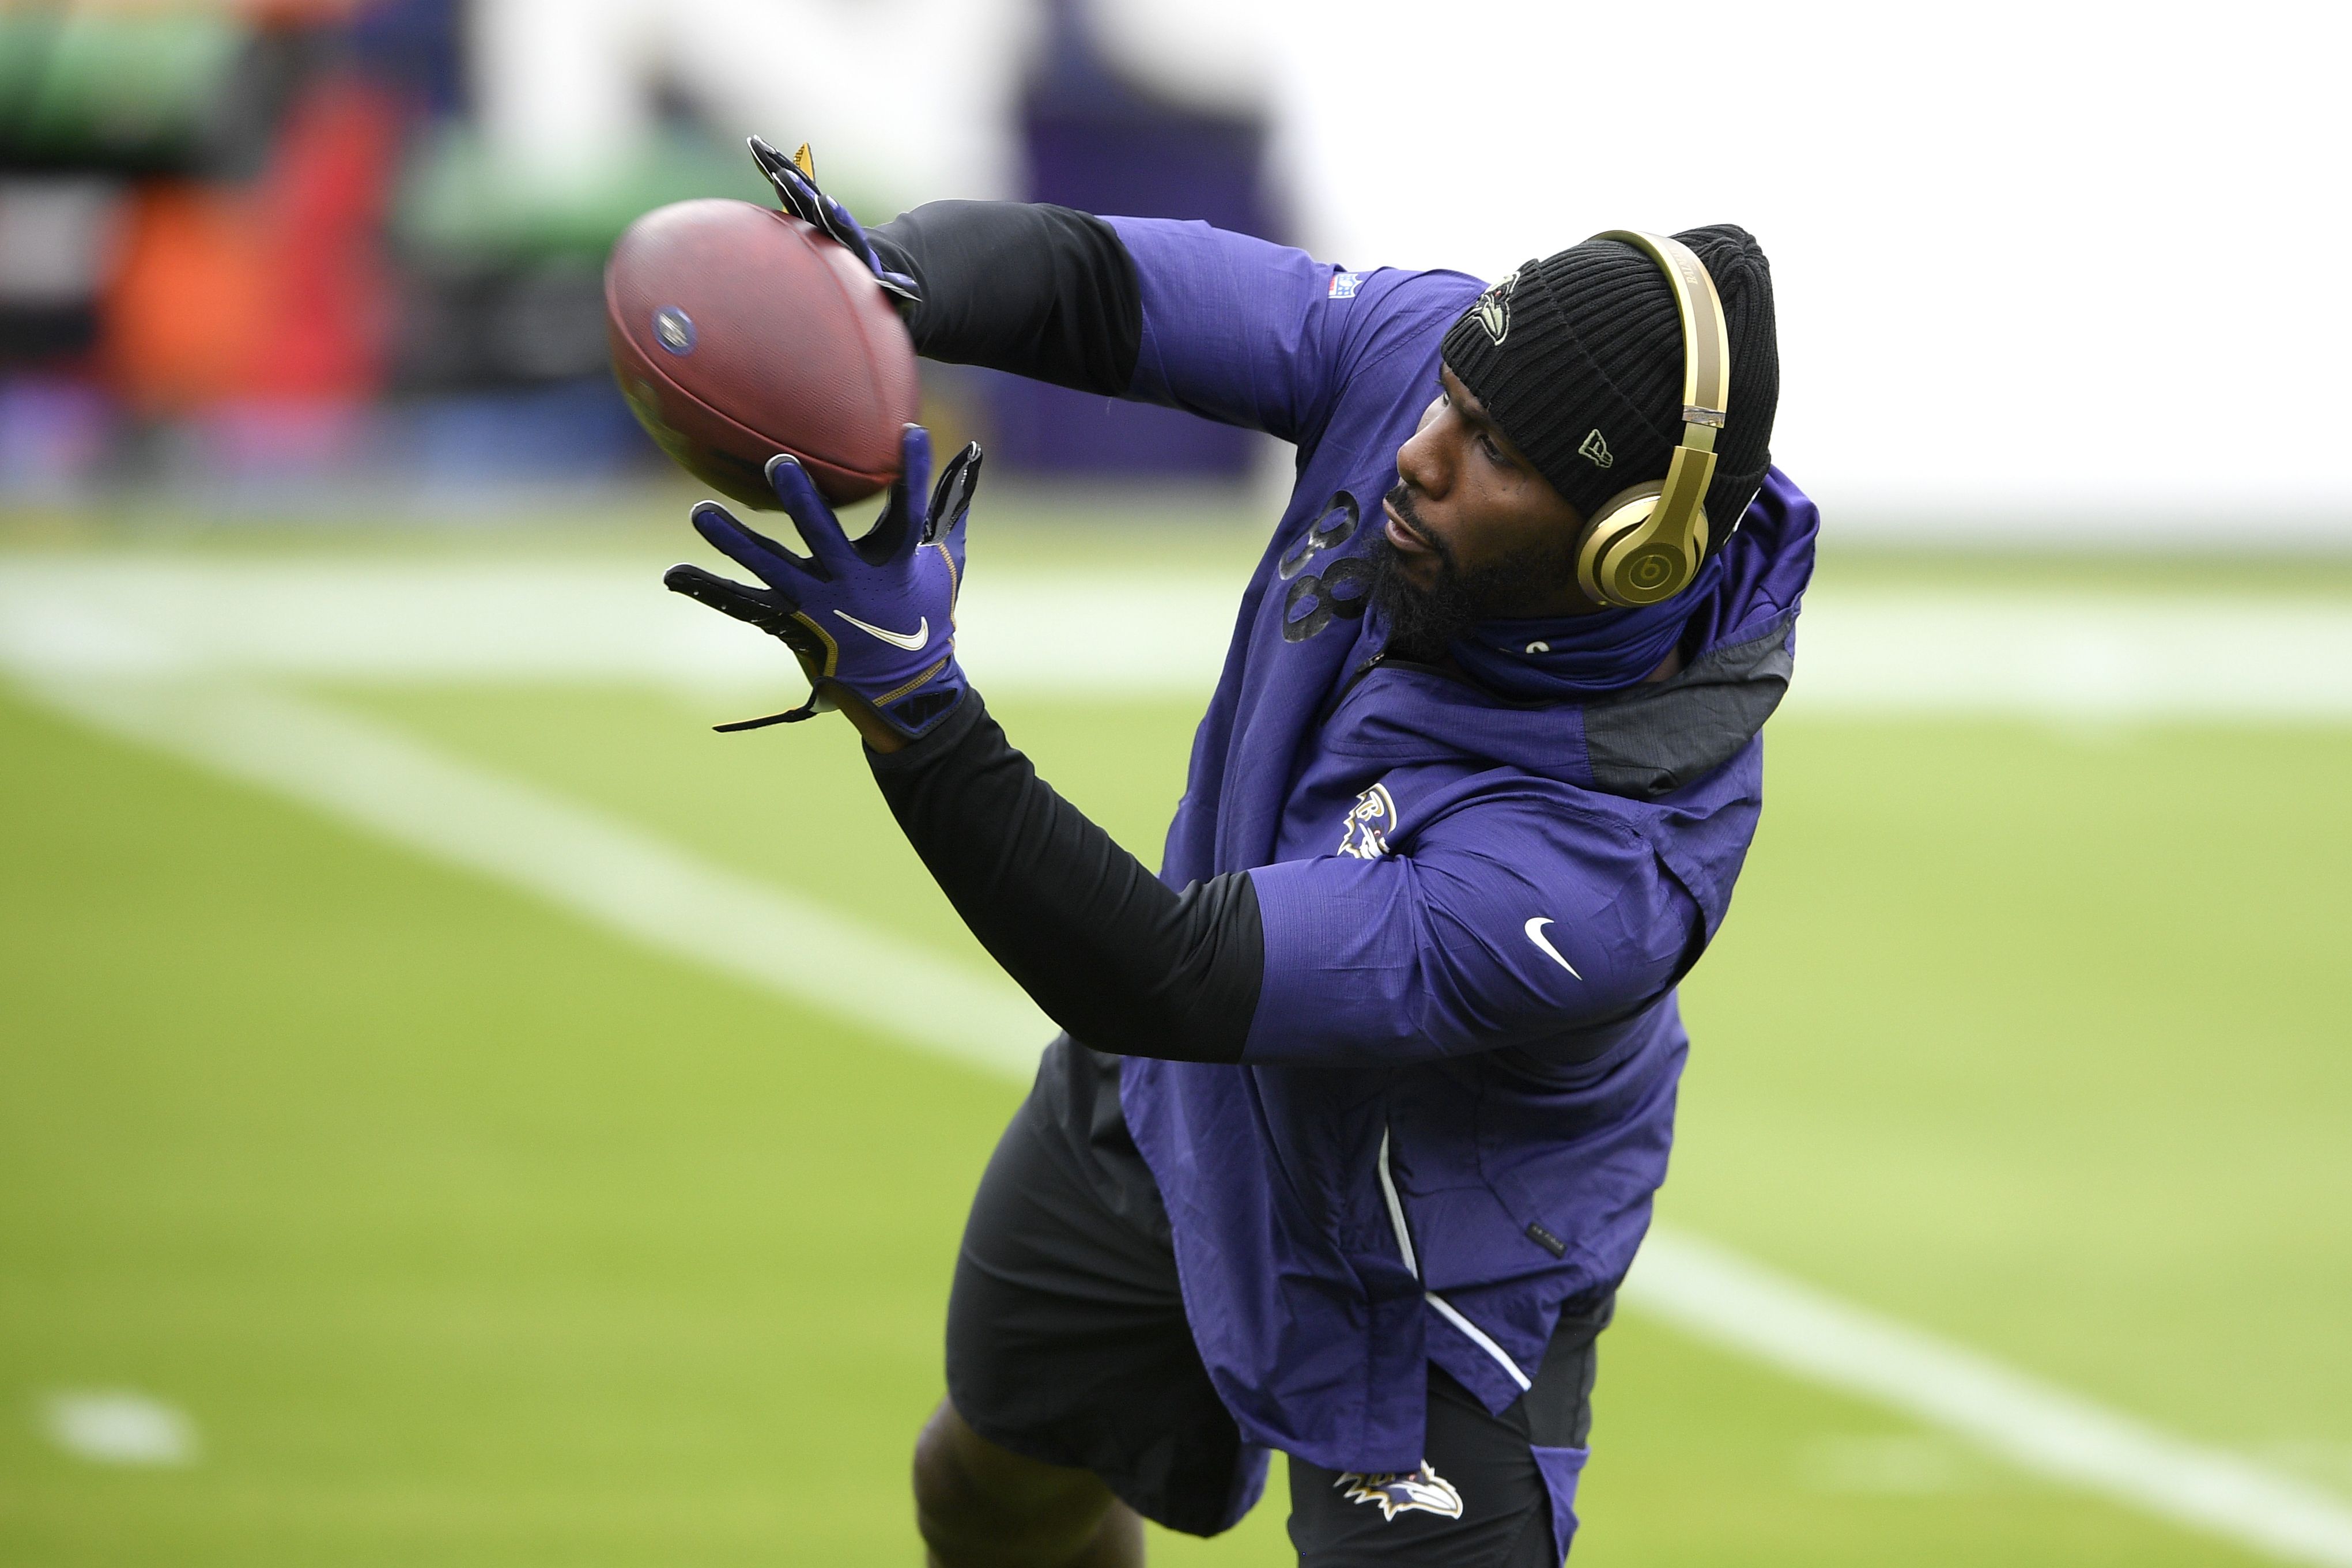 I had to hold back my tears': Ravens WR Dez Bryant scores first